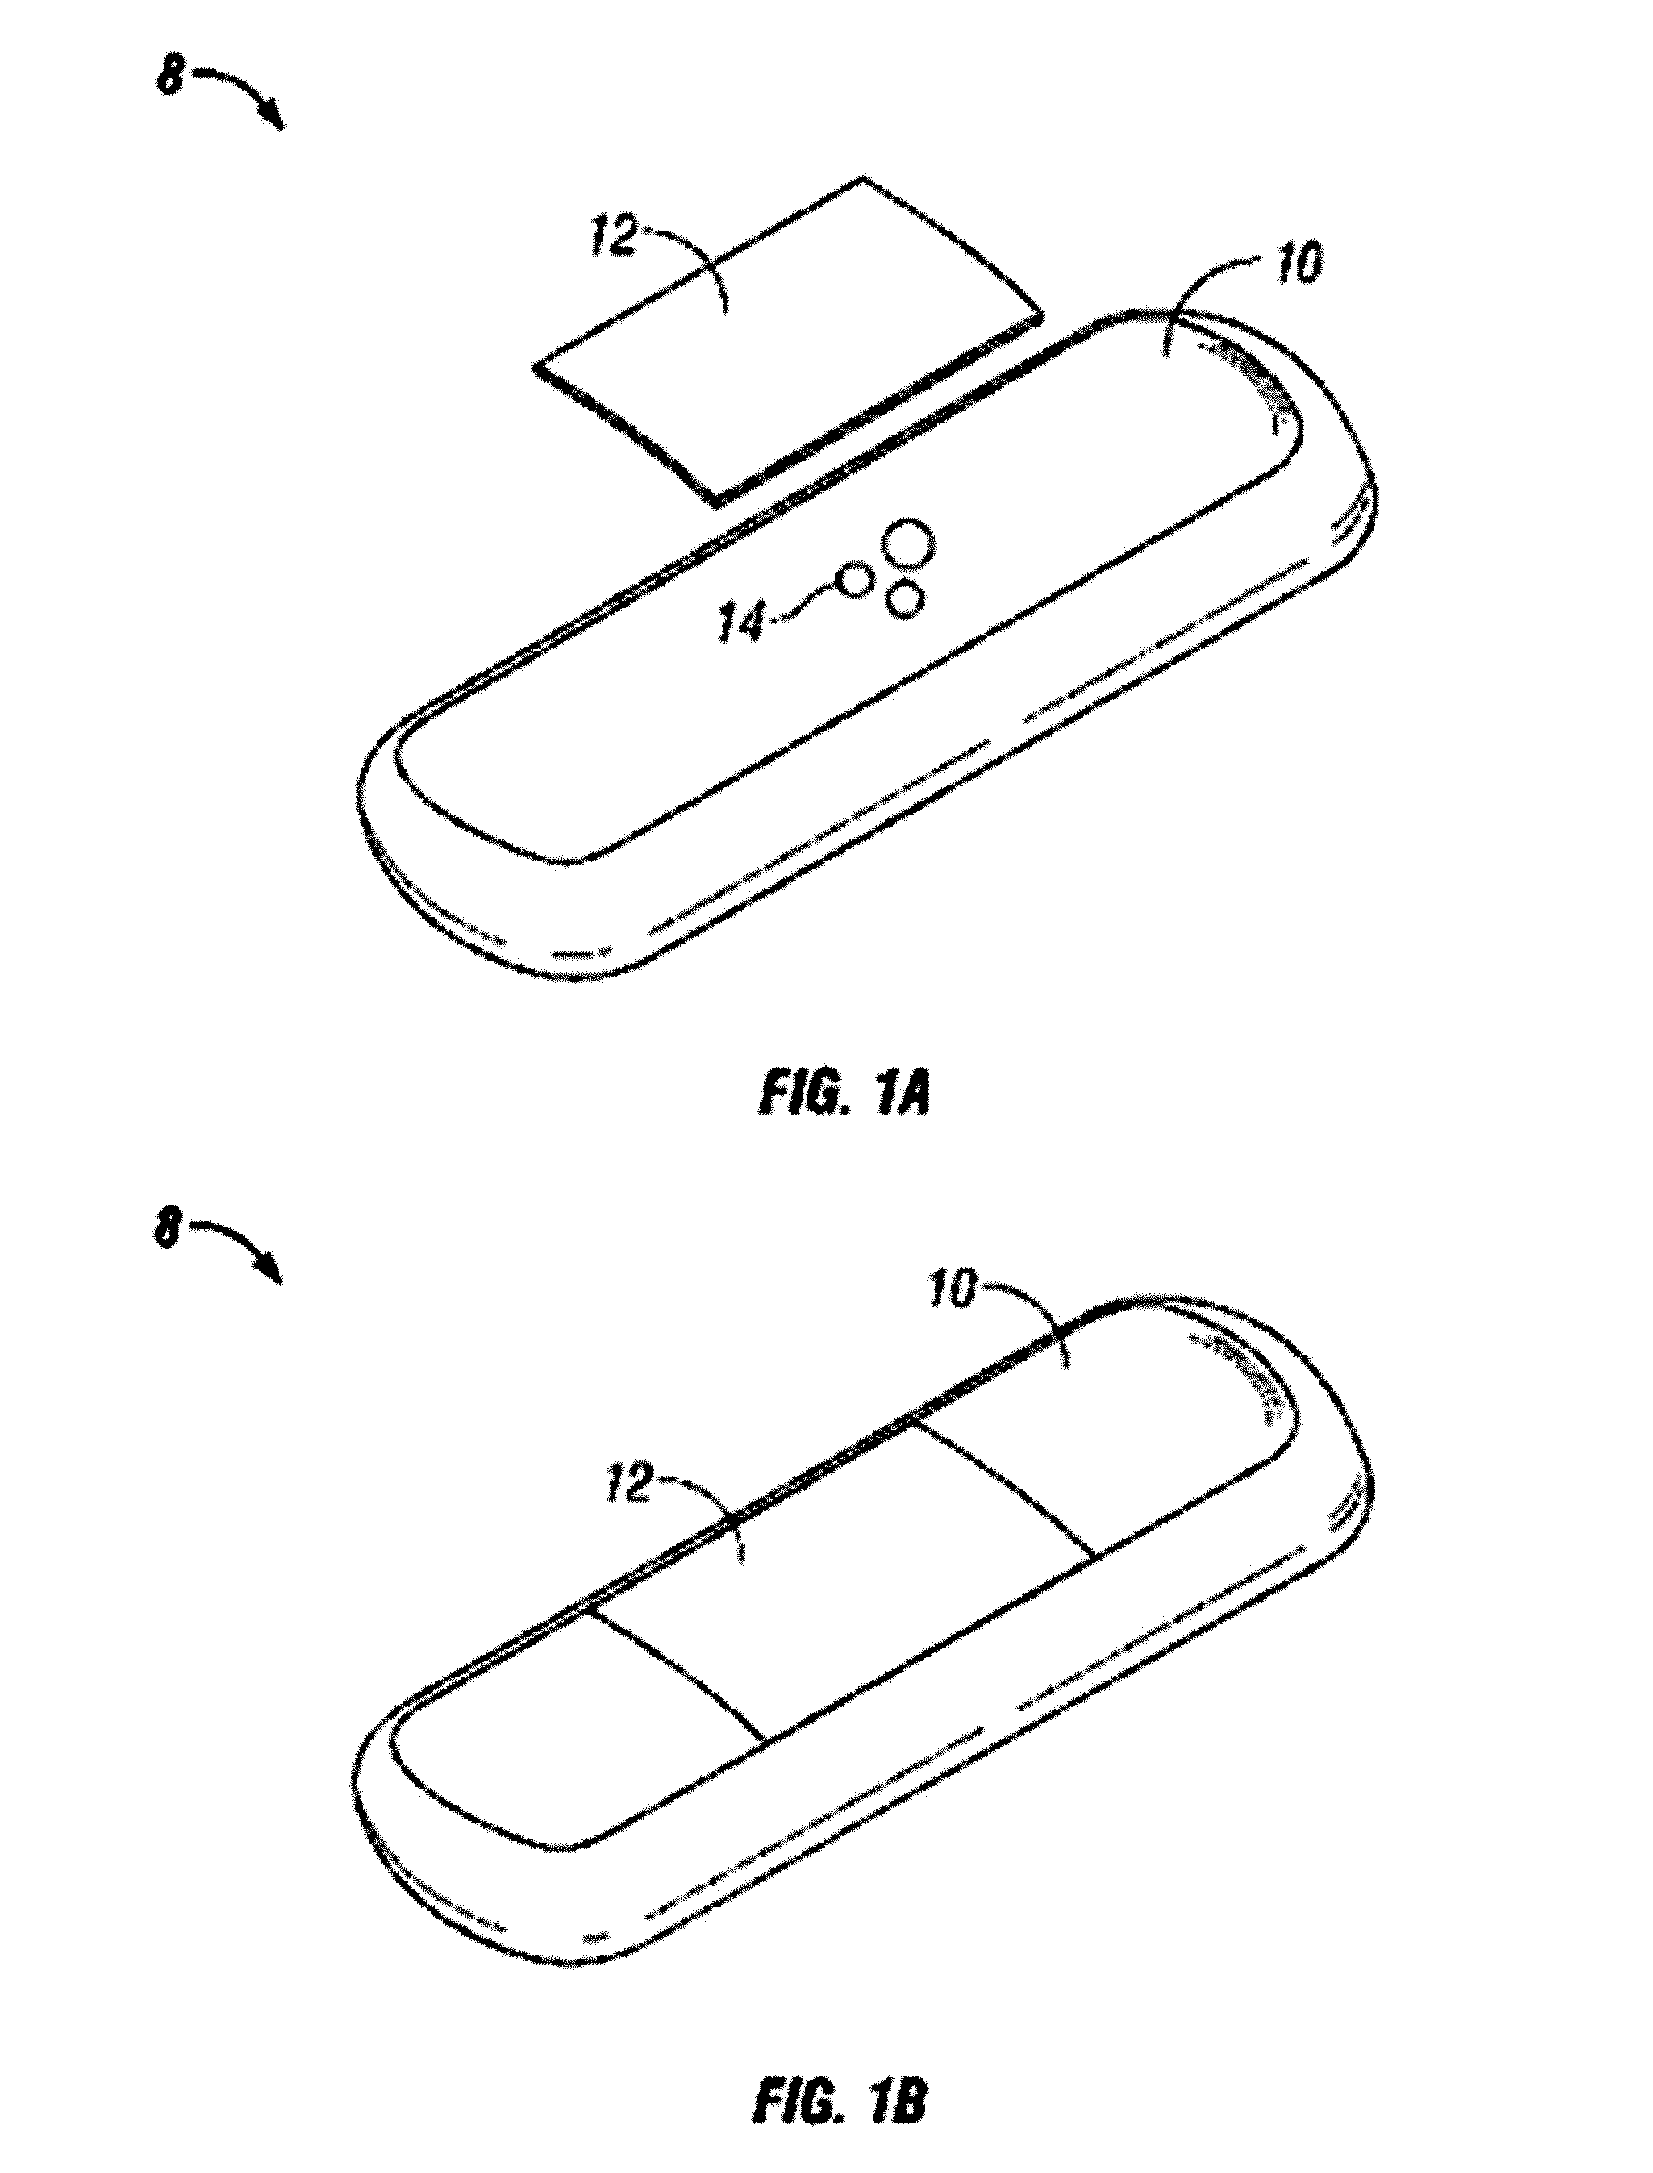 Systems and methods for manufacture of an analyte-measuring device including a membrane system